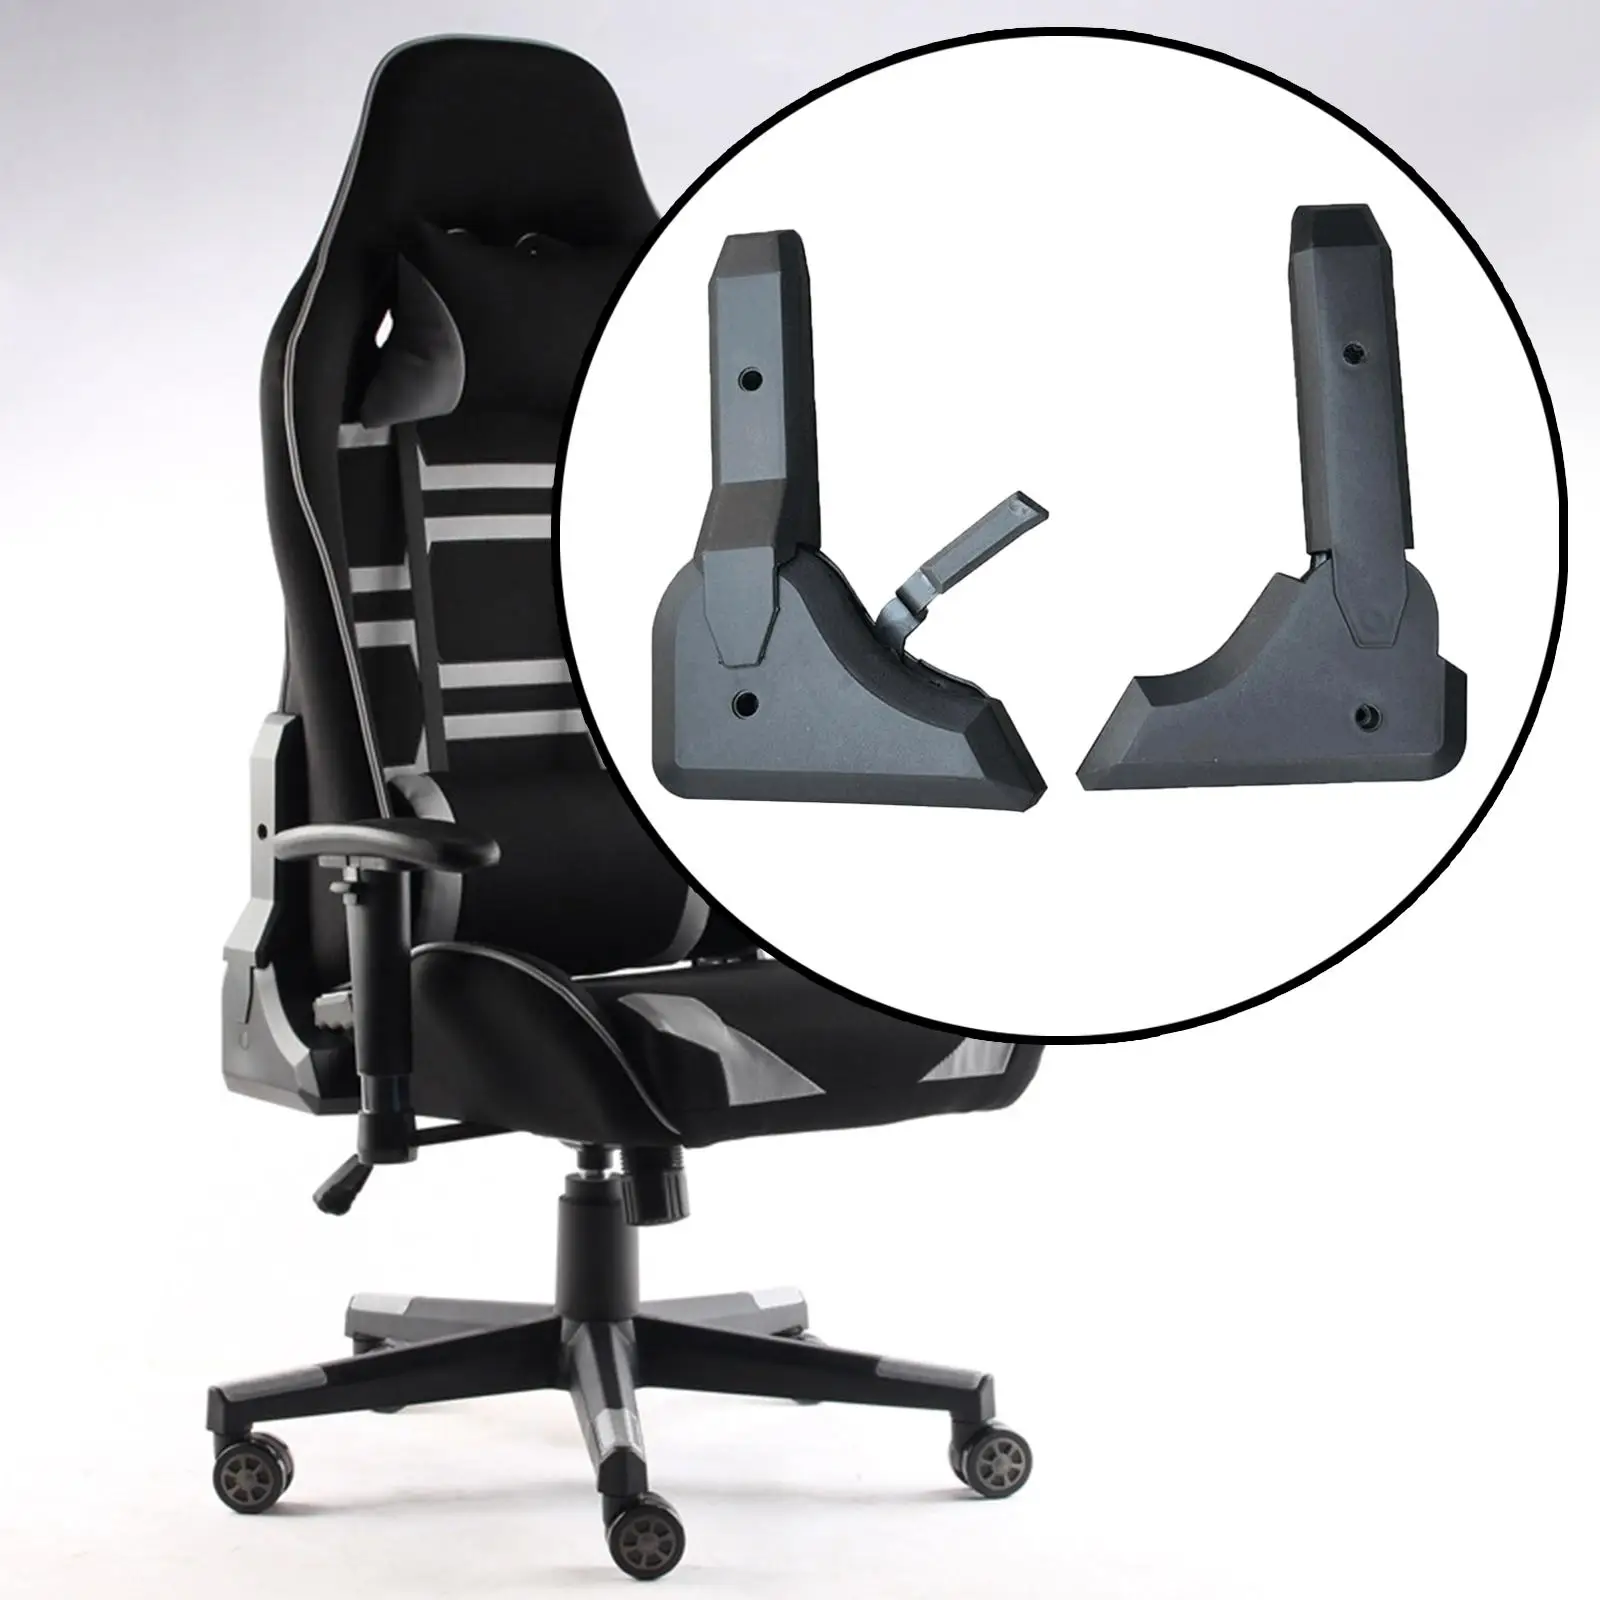 2x Gaming Chair Angle Adjuster High Back Swivel Computer Desk Chair Angle Adjuster for Office Chair Accessories Spare Parts